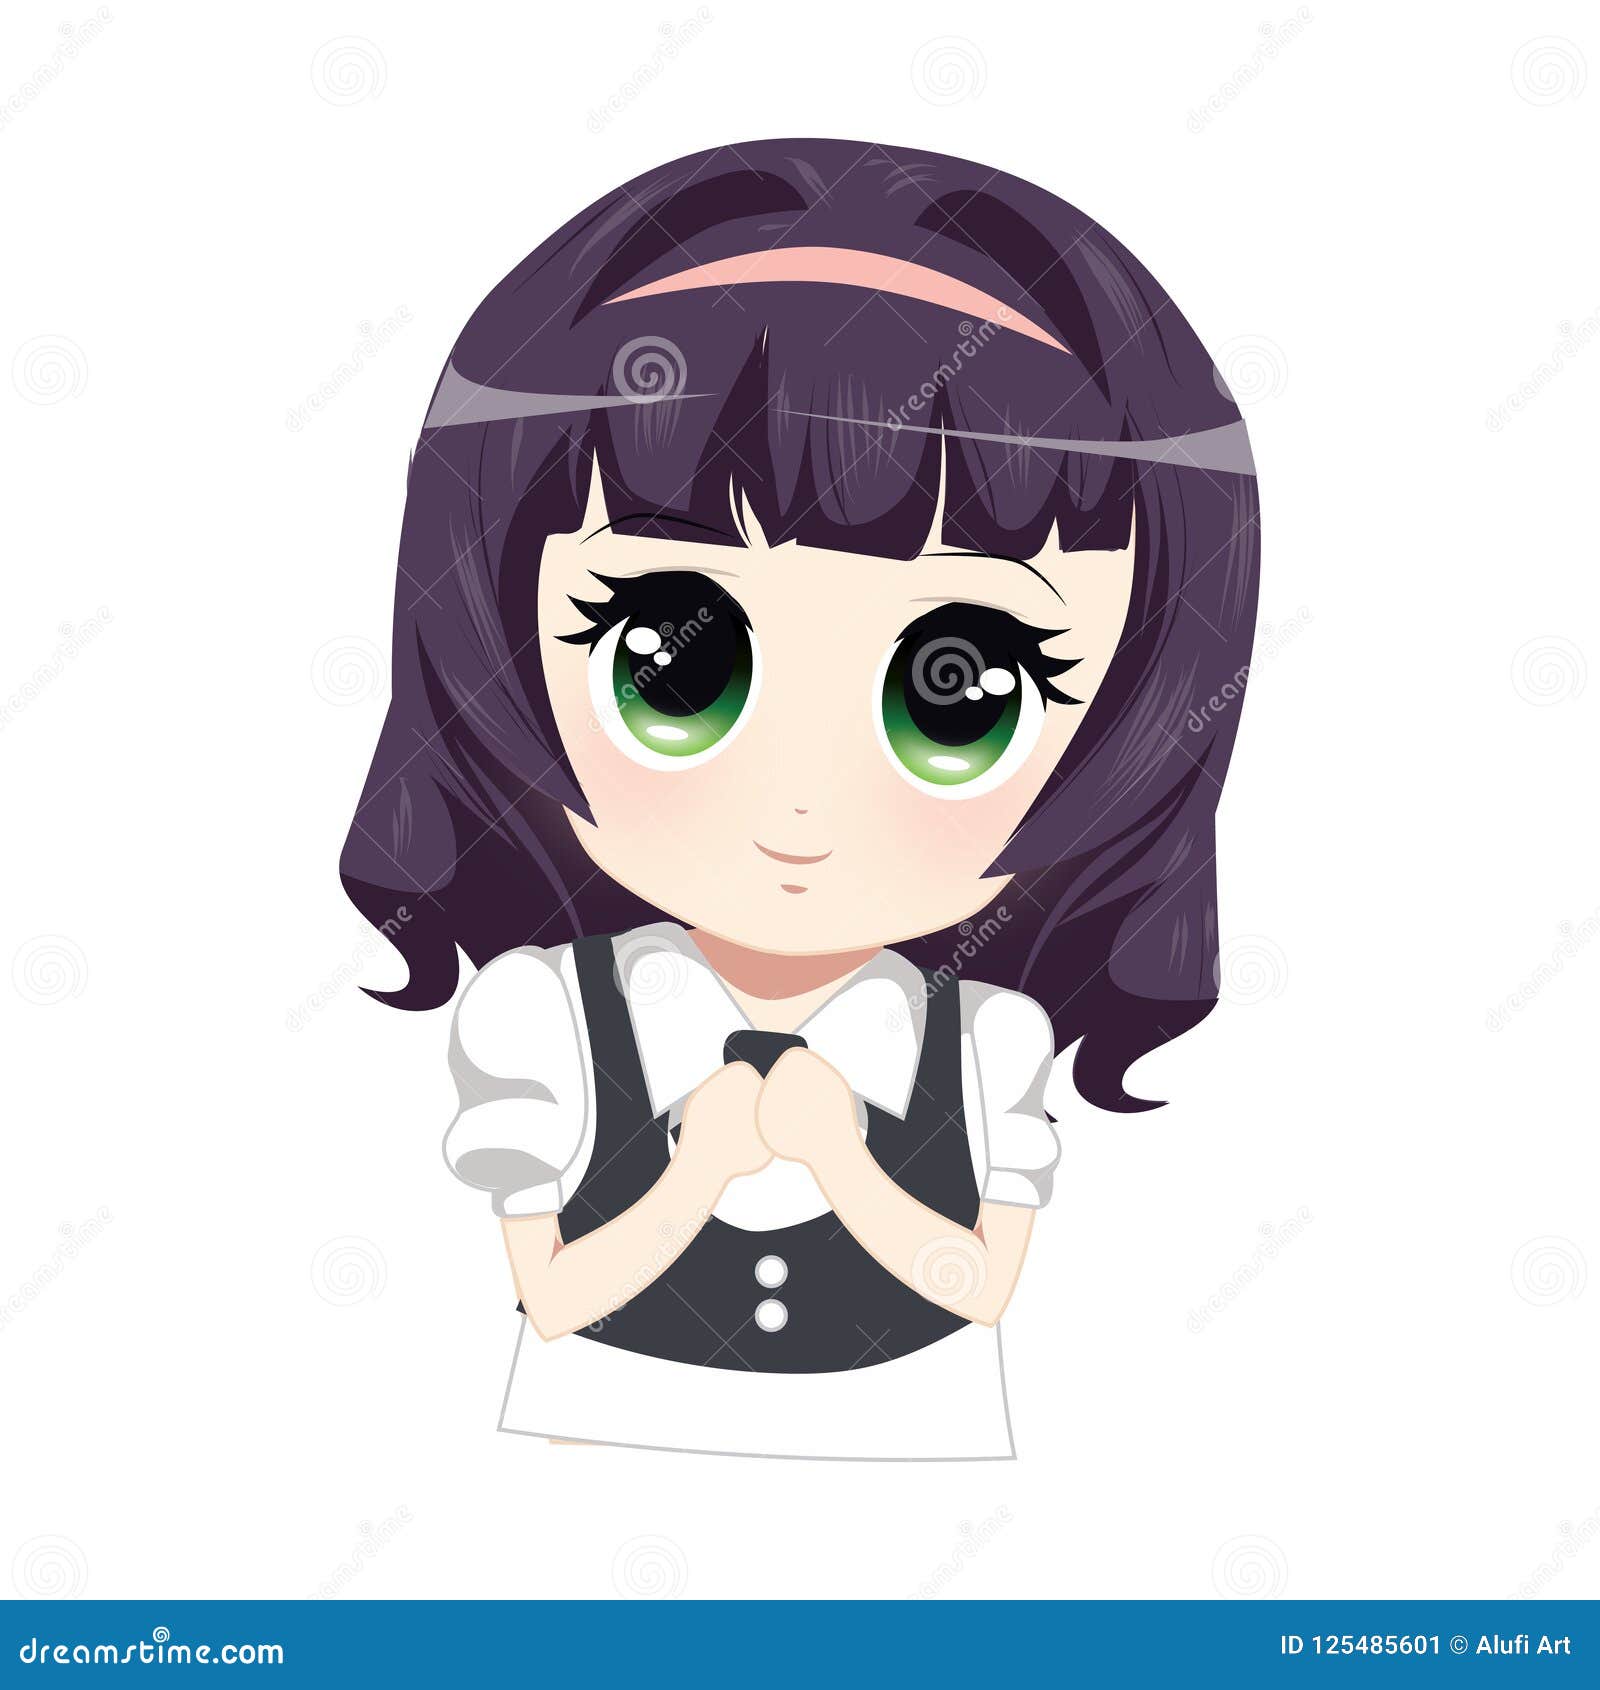 Cute Young Anime Girl Emoticon Stock Vector - Illustration of eyes, green:  125485601